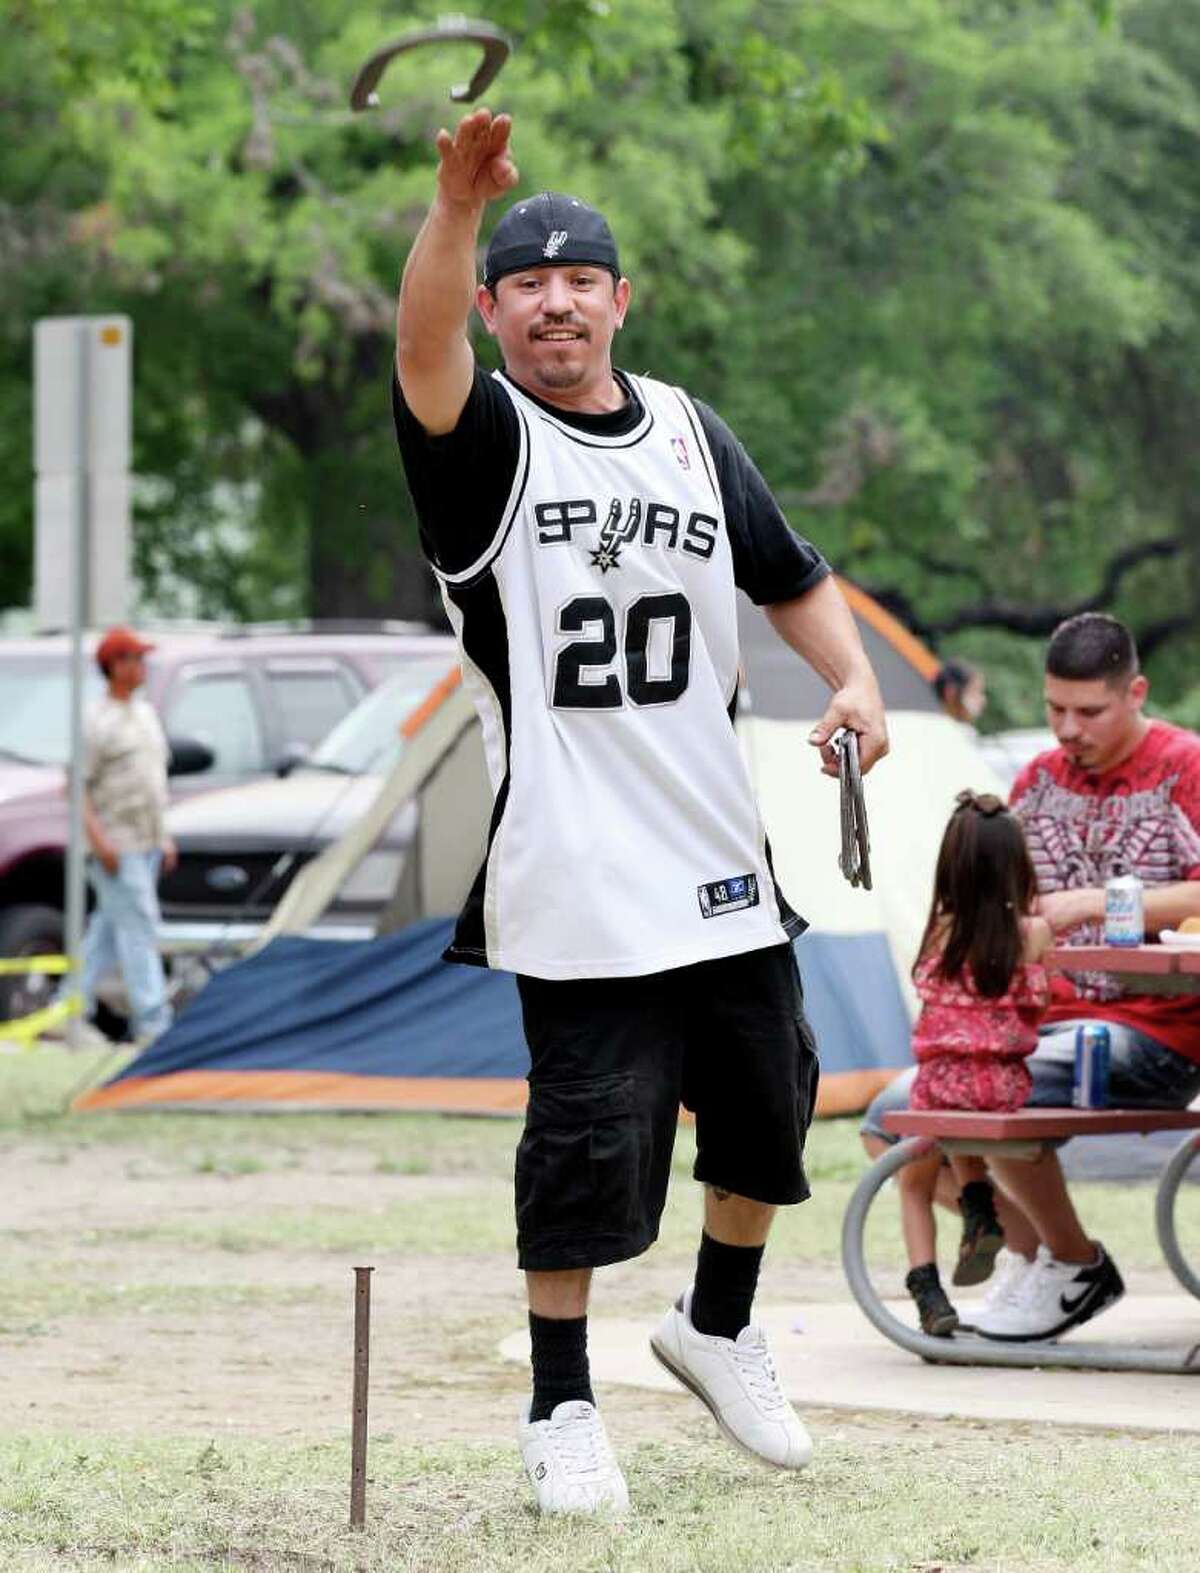 Nathan Ortiz plays horseshoes Sunday April 24, 2011 at Brackenridge Park while spending Easter with his family. (PHOTO BY EDWARD A. ORNELAS/eaornelas@express-news.net)